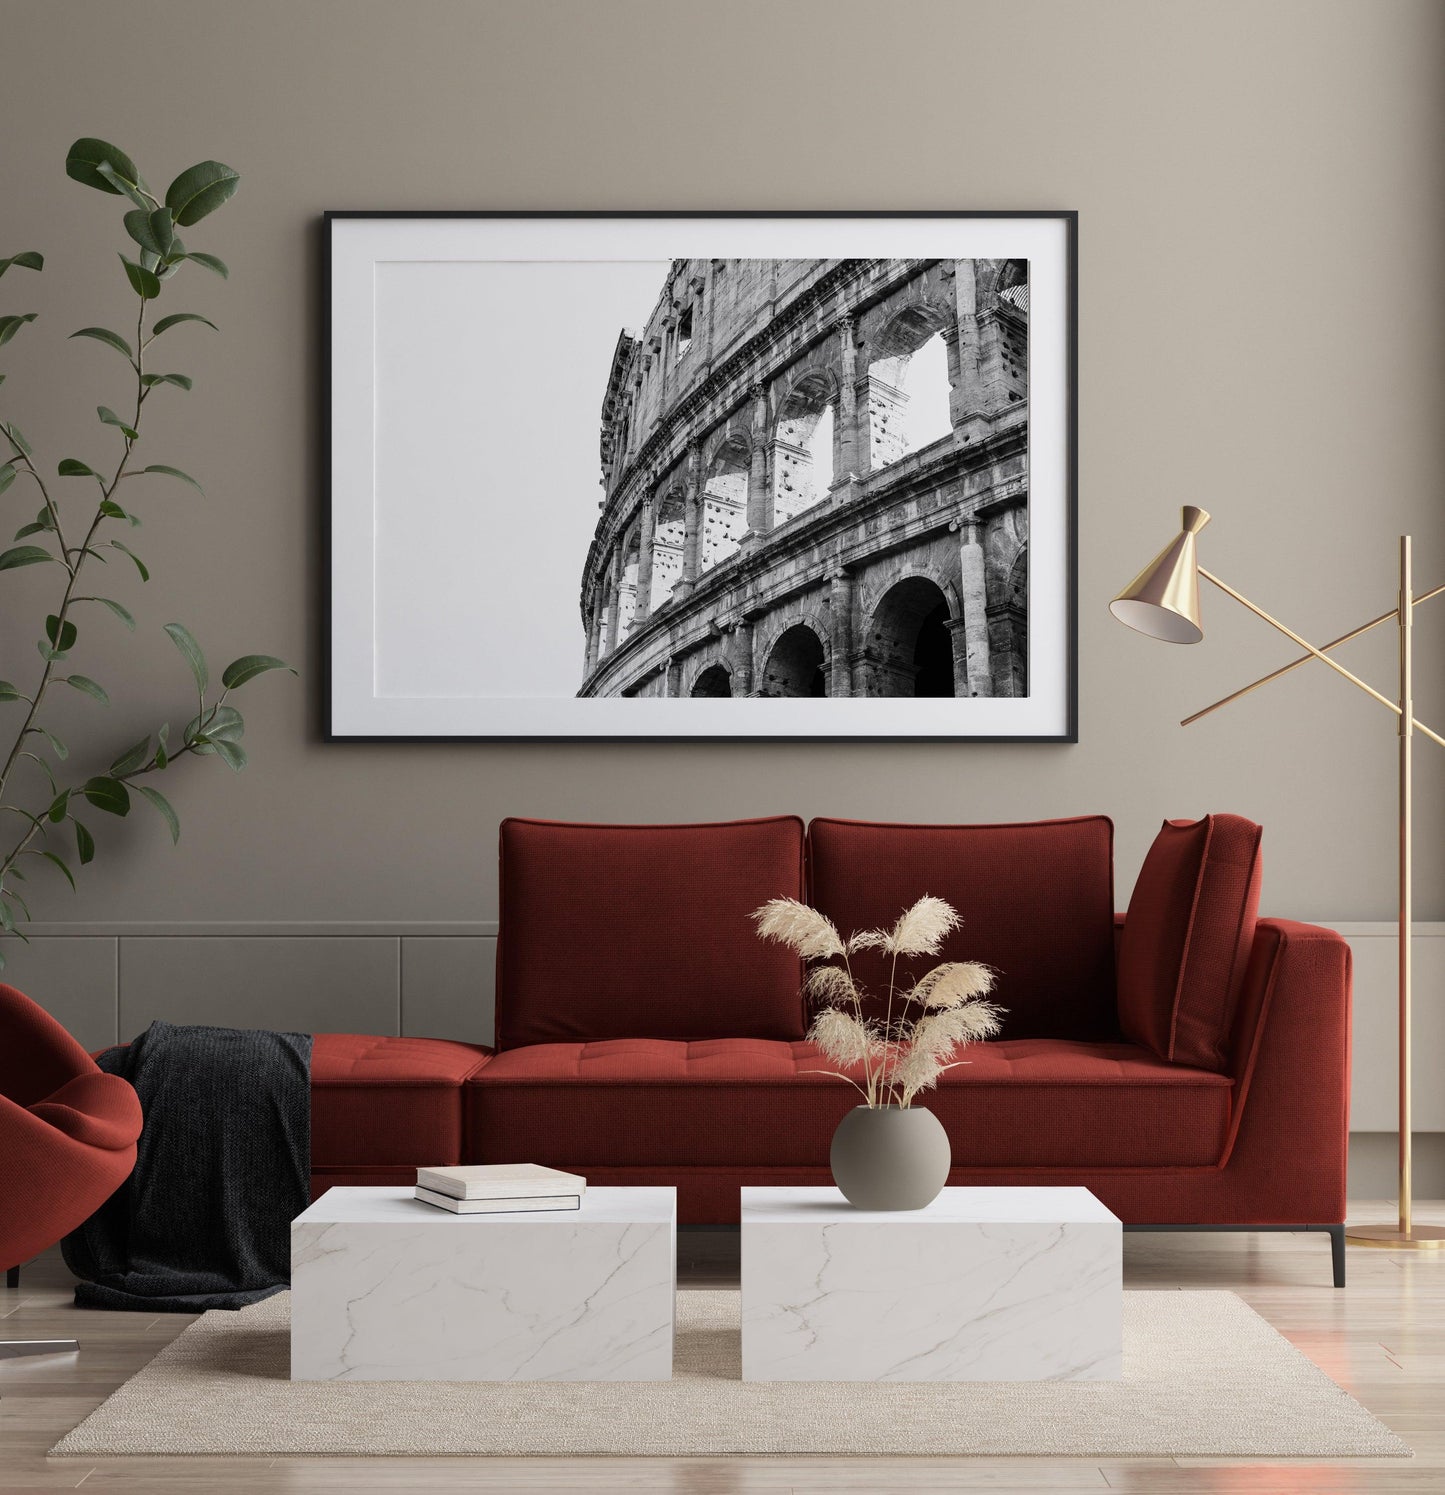 Black and White Roman Colosseum IV | Rome Italy Photography - Departures Print Shop